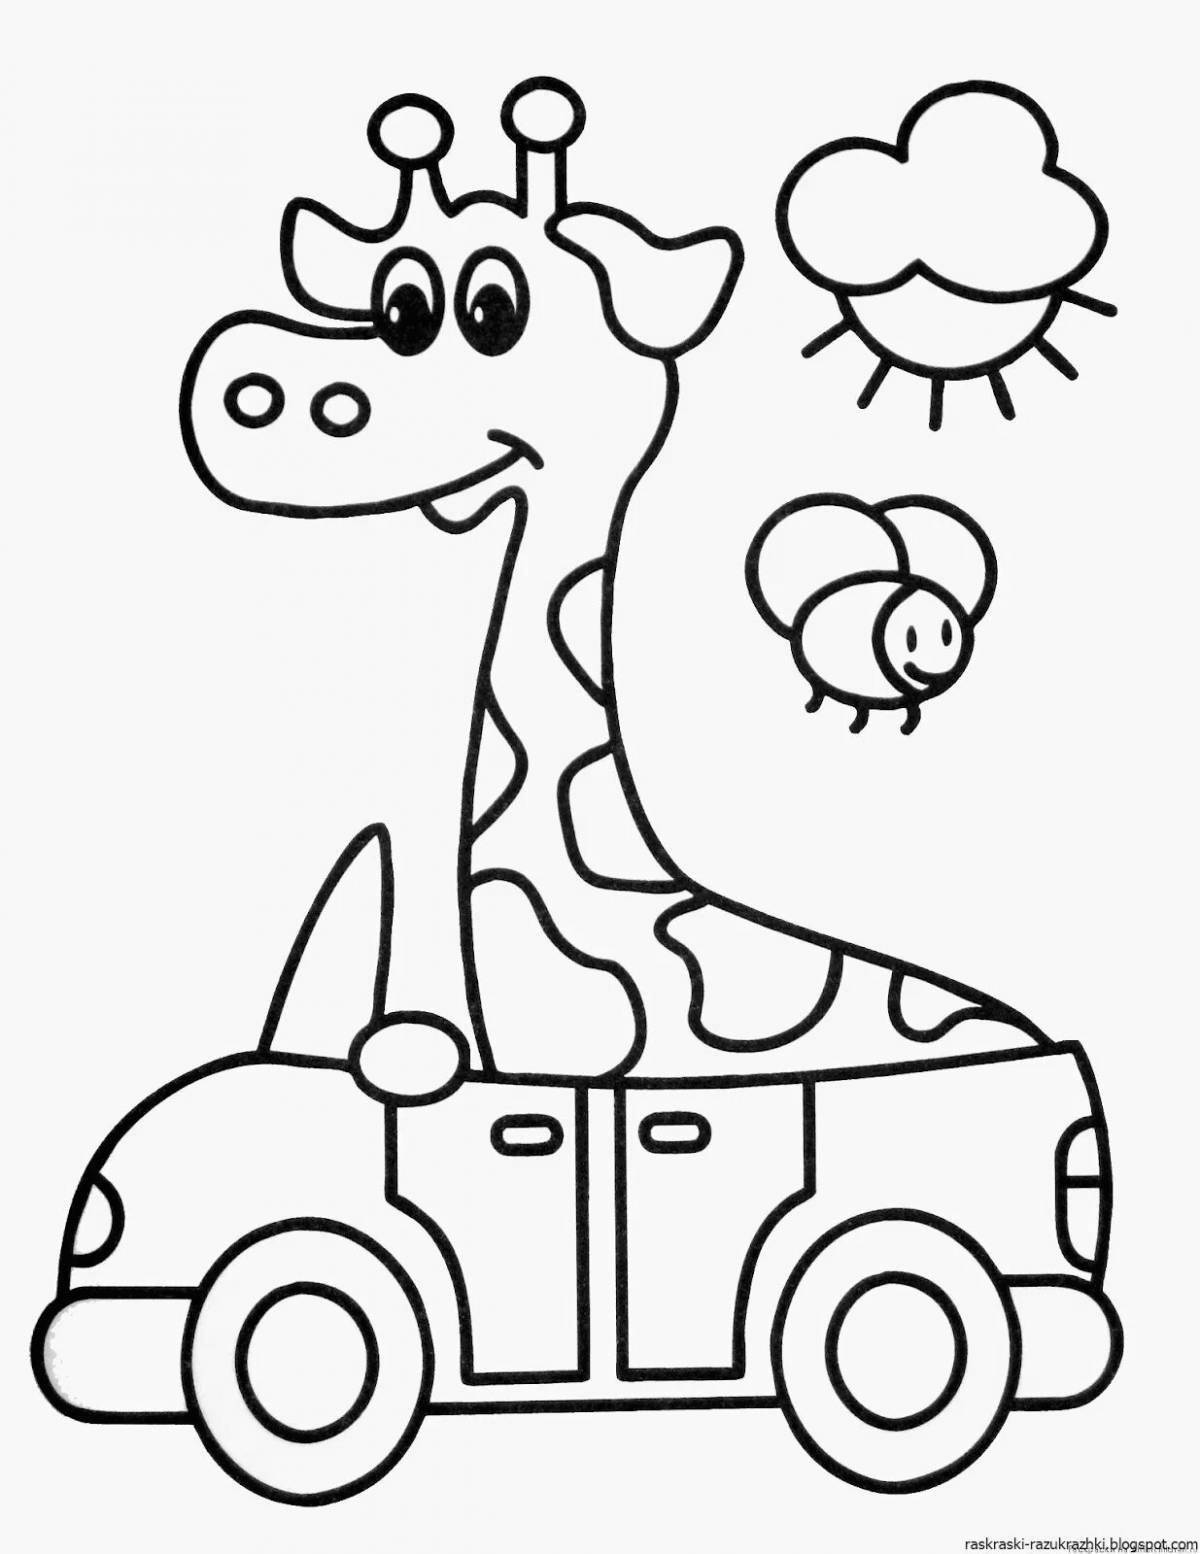 Coloring pages with cute cars for 3 year olds